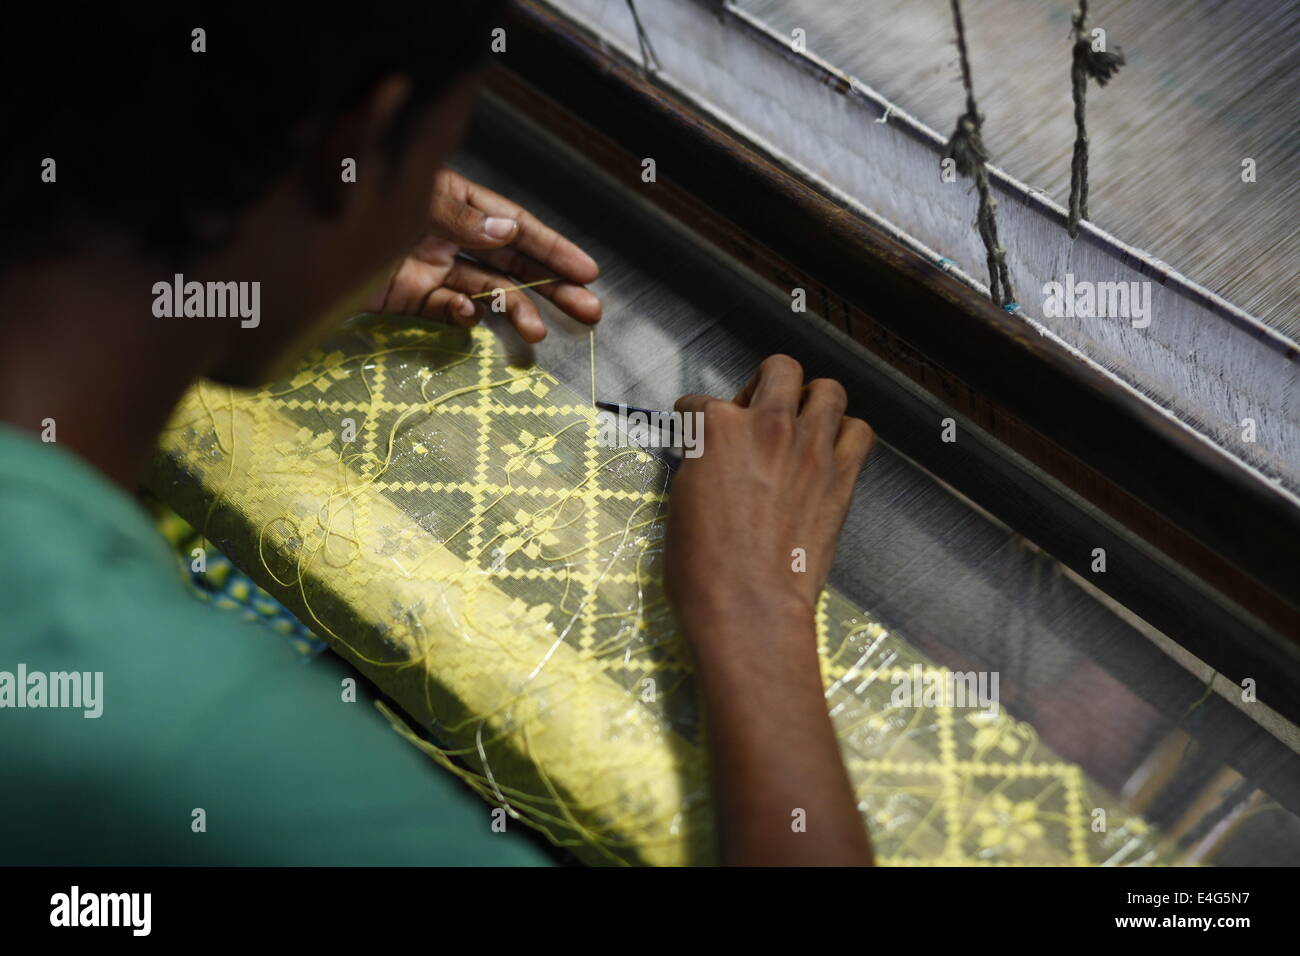 July 10, 2014 - Weavers weave famous Jamdani Saree.A sharee is the traditional garment worn by women in the Indian subcontinent. It is a long strip of unstitched cloth, ranging from five to nine yards in length, which can be draped in various style. The most common style is for the sari to be wrapped around the waist, with one end then draped over the shoulder.The Sharee boasts of the oldest existence in the world. It is more than 5,000 years old! Some people think that sharee is influenced by Greek or Roman toga, which we see on ancient statues. Stock Photo